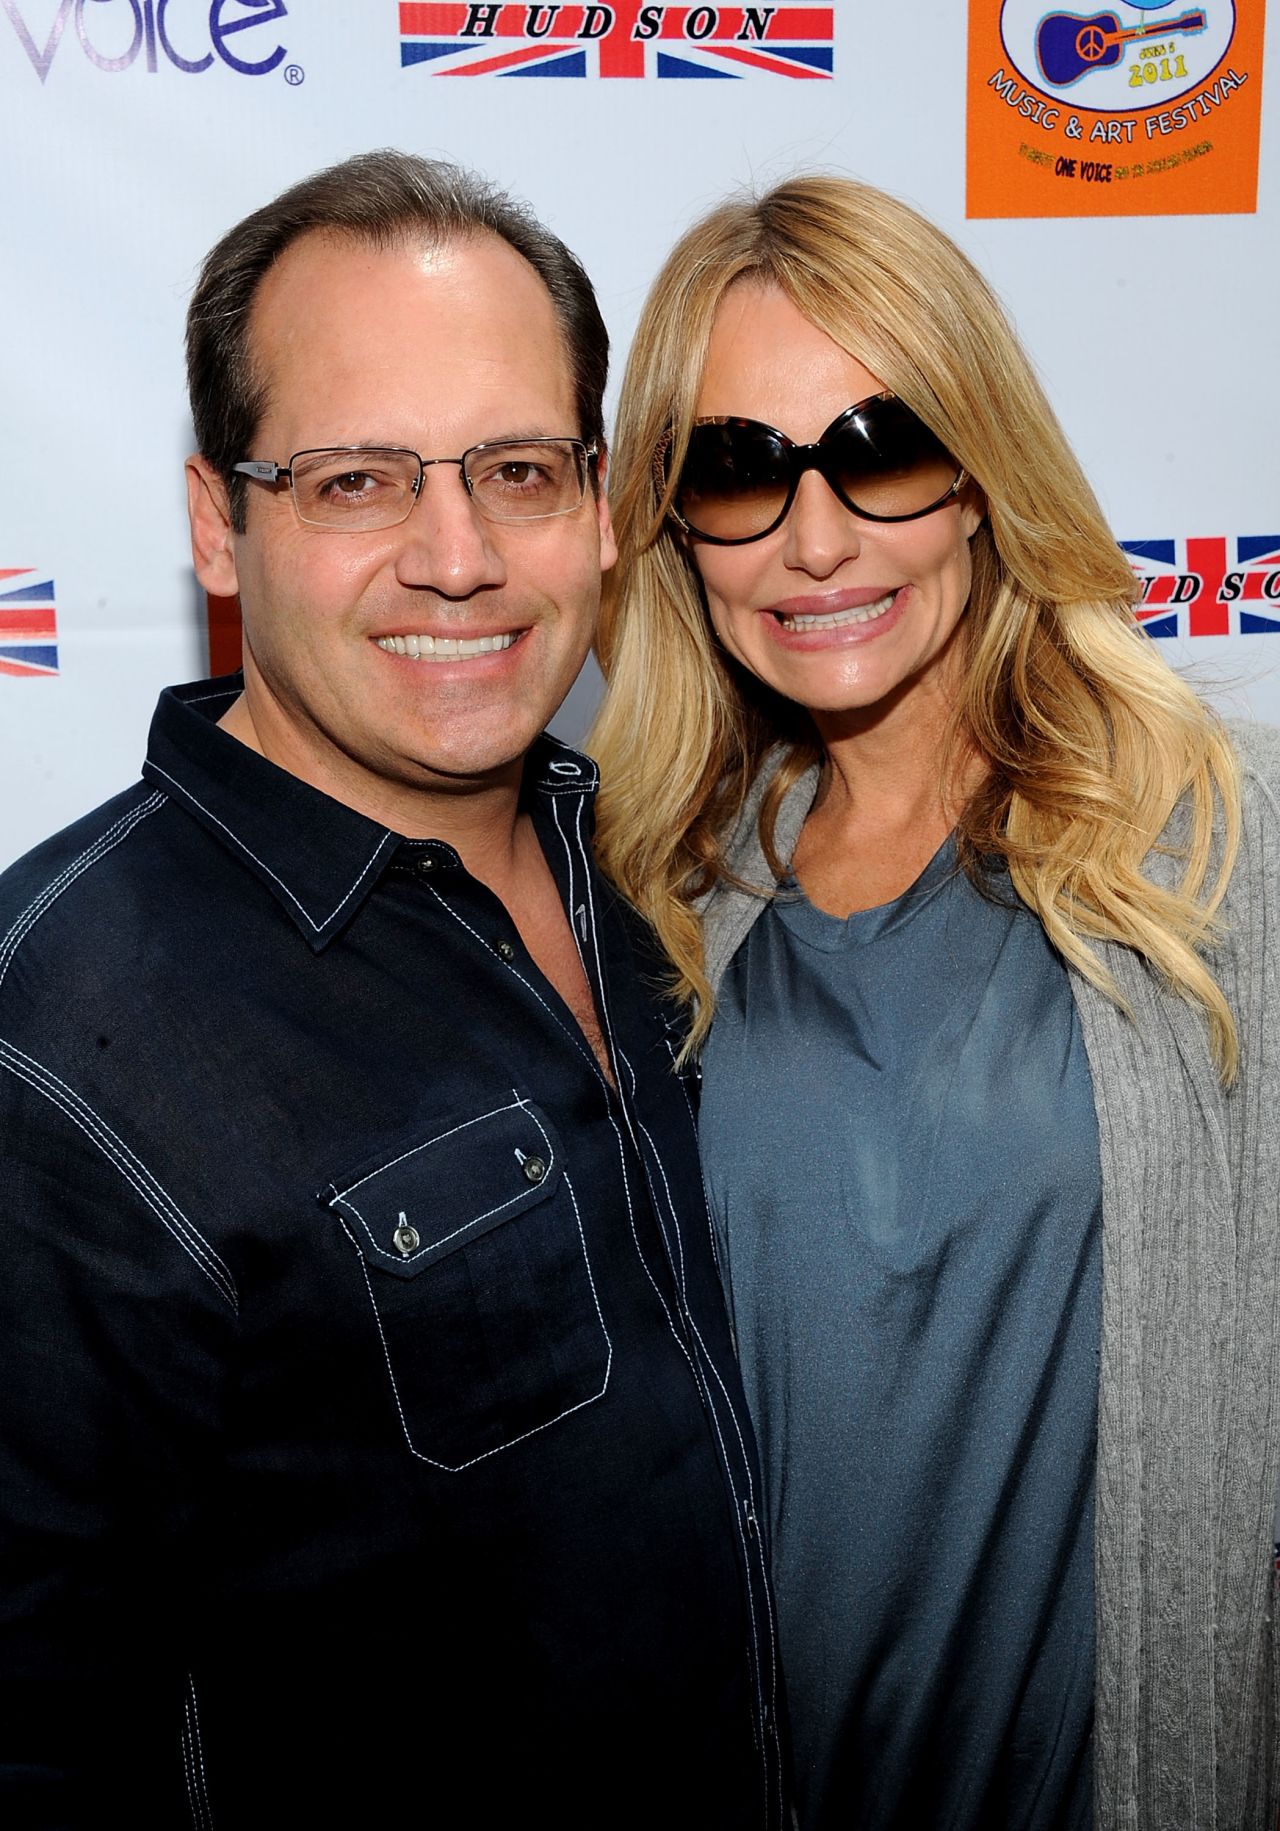 Russell Armstrong, left, hanged himself in August 2011 while appearing on <a href="http://www.cnn.com/2011/SHOWBIZ/celebrity.news.gossip/09/07/russell.armstrong.toxicology/index.html">Bravo's "Real Housewives of Beverly Hills."</a> The series featured his estranged wife, Taylor, grappling with the aftermath of his suicide.